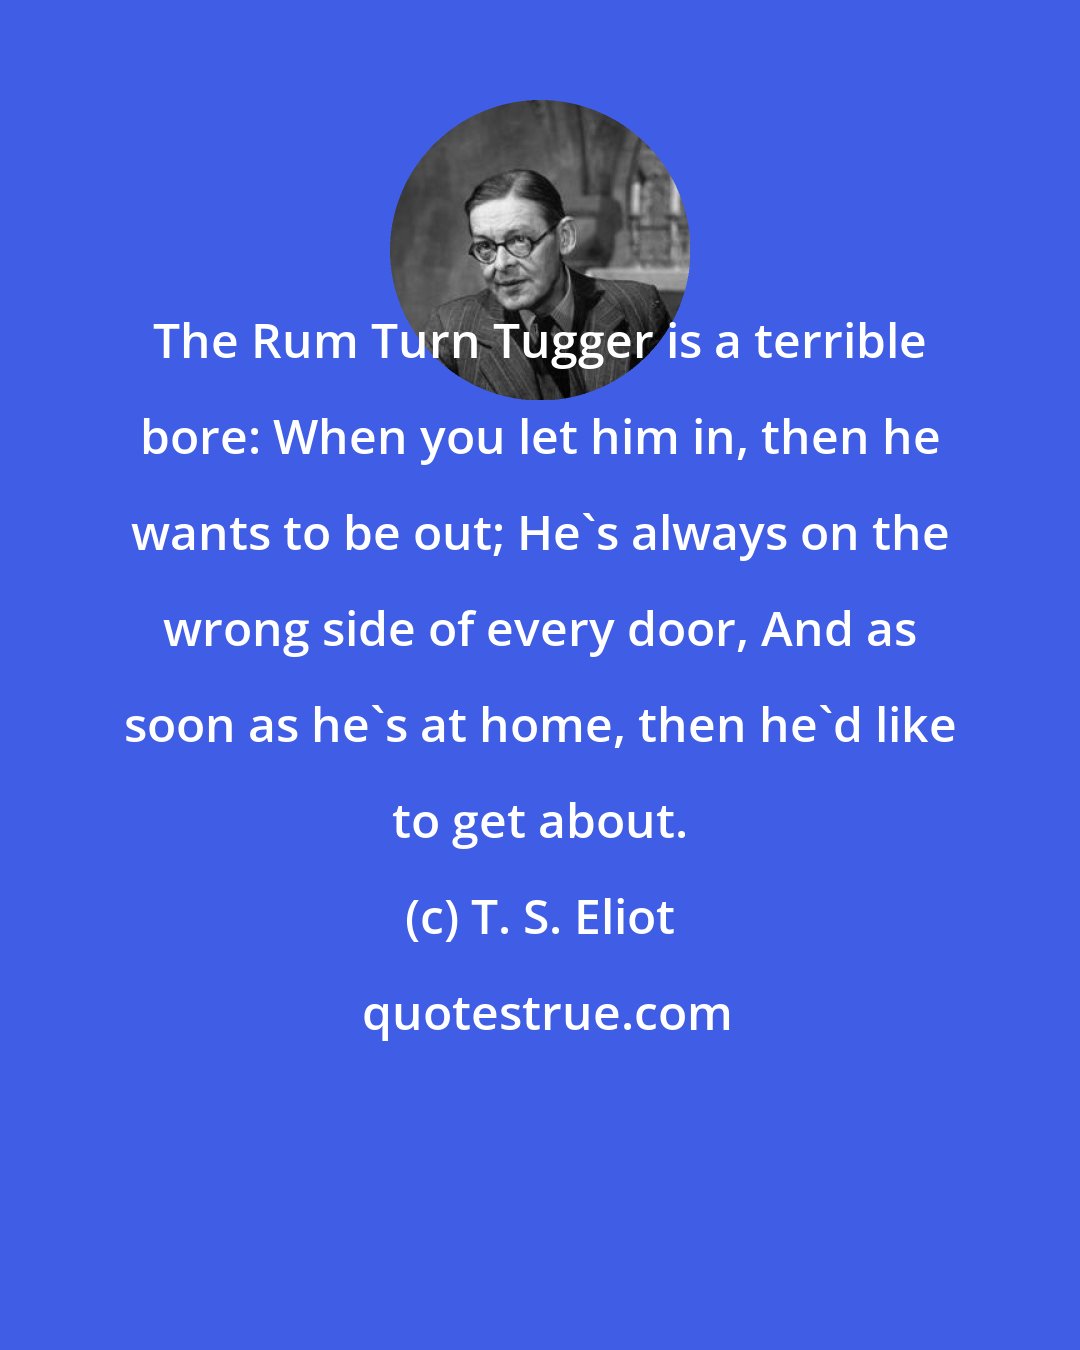 T. S. Eliot: The Rum Turn Tugger is a terrible bore: When you let him in, then he wants to be out; He's always on the wrong side of every door, And as soon as he's at home, then he'd like to get about.